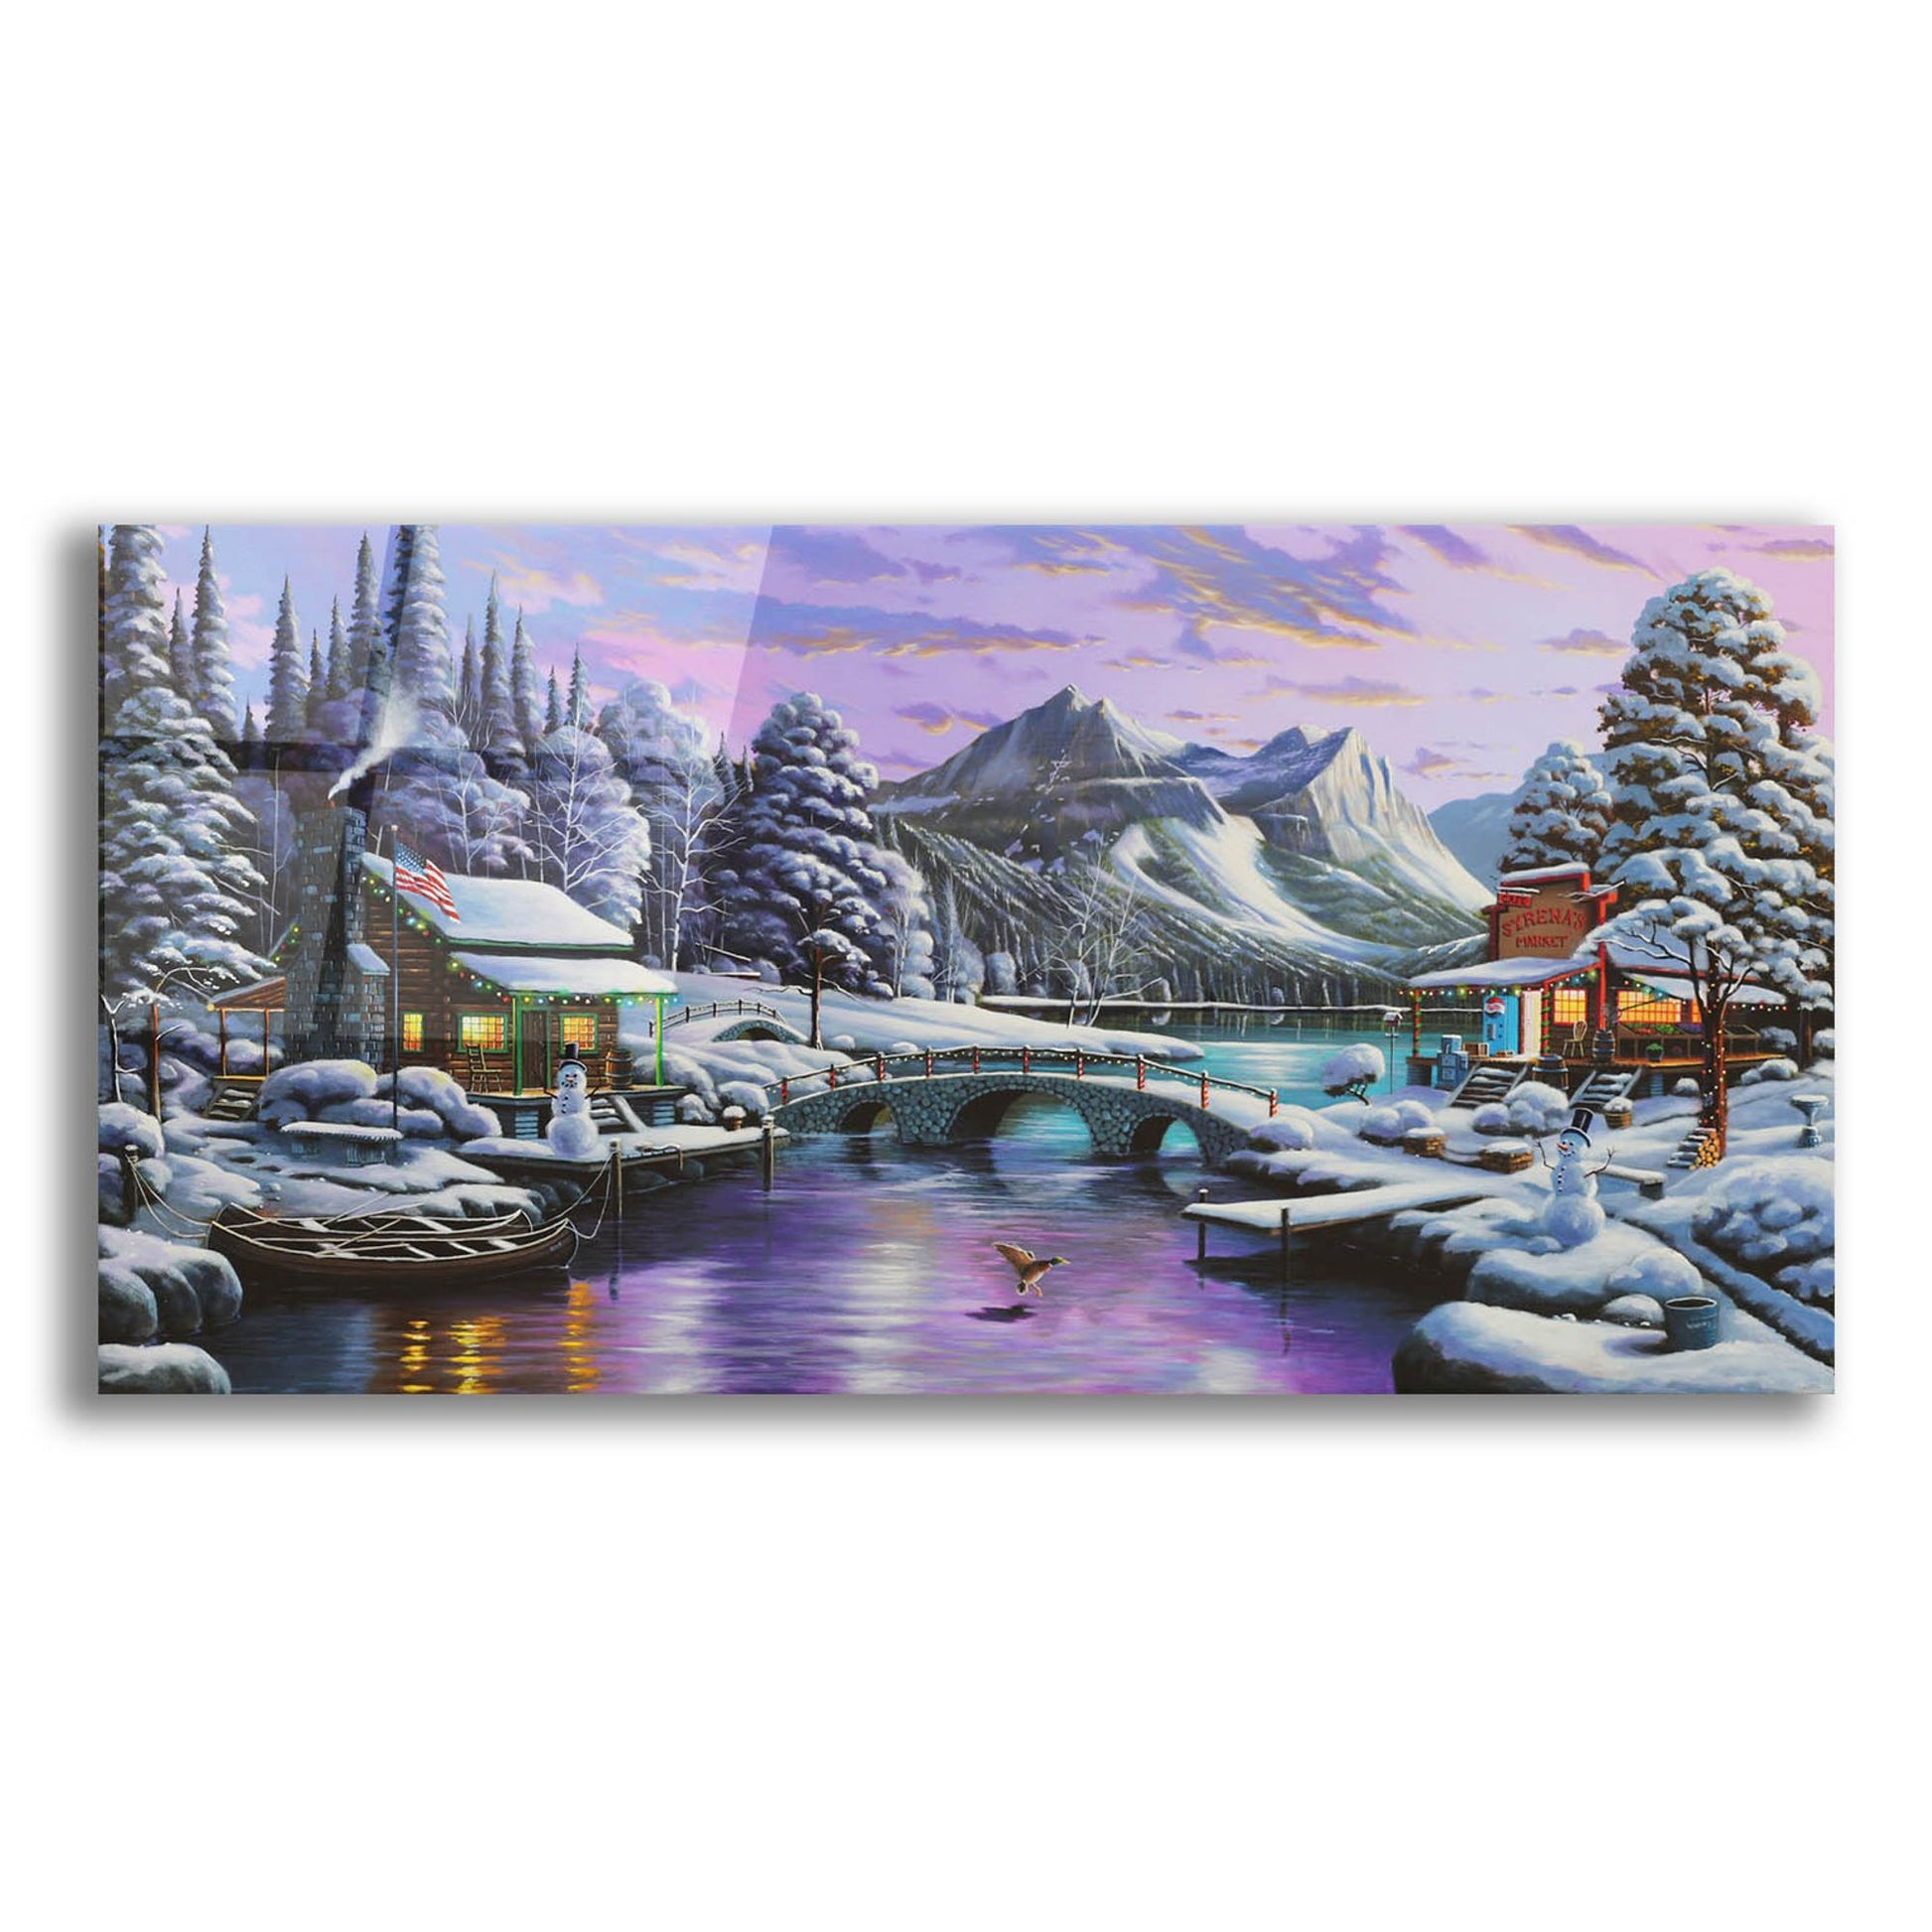 Epic Art 'White Christmas' by Geno Peoples, Acrylic Glass Wall Art,24x12